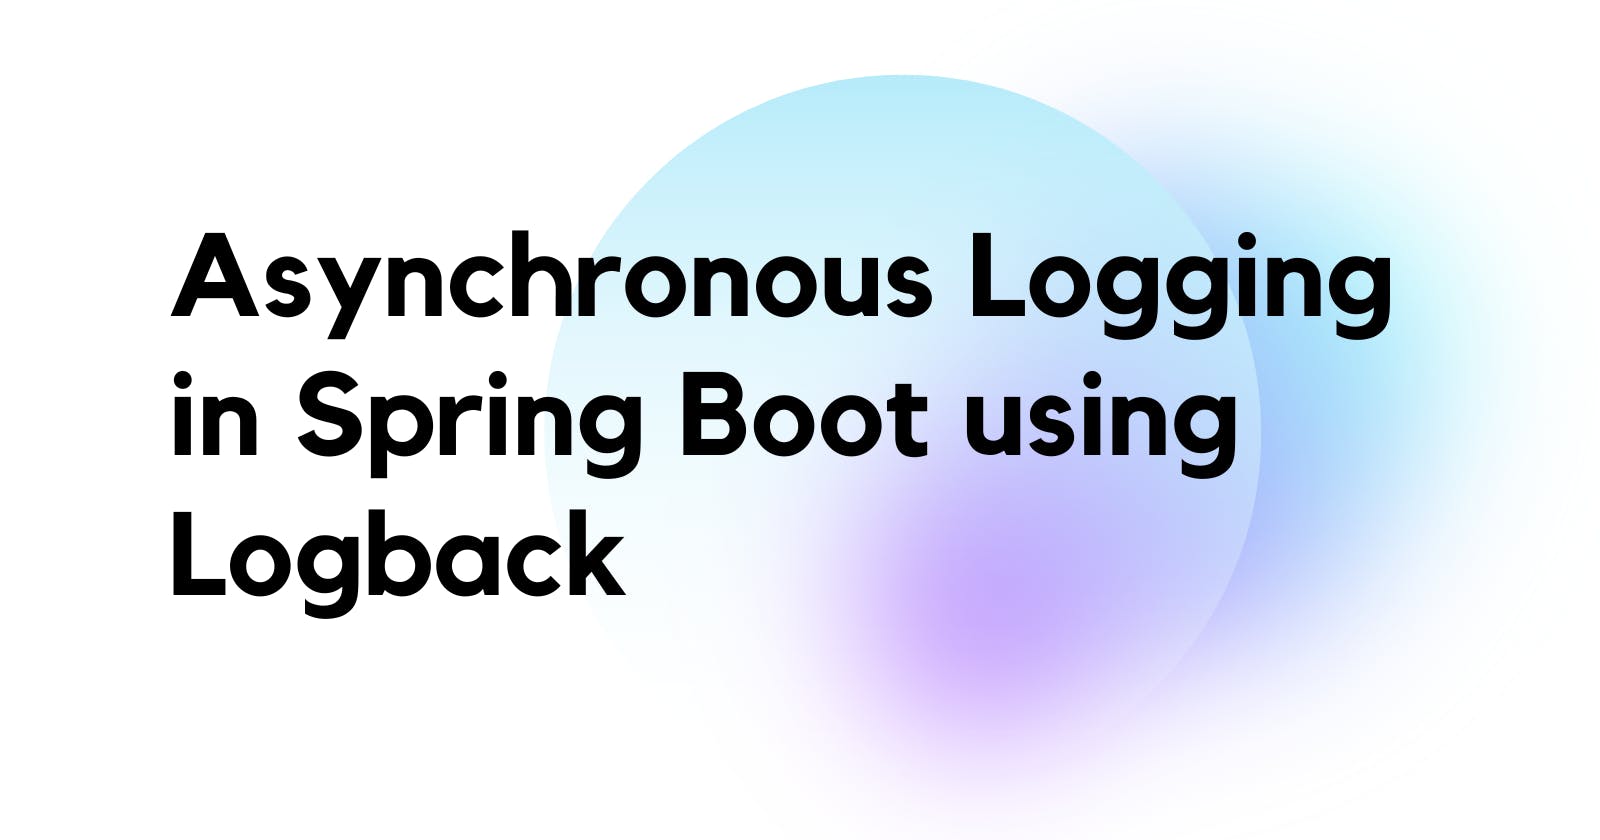 Asynchronous Logging in Spring Boot using Logback